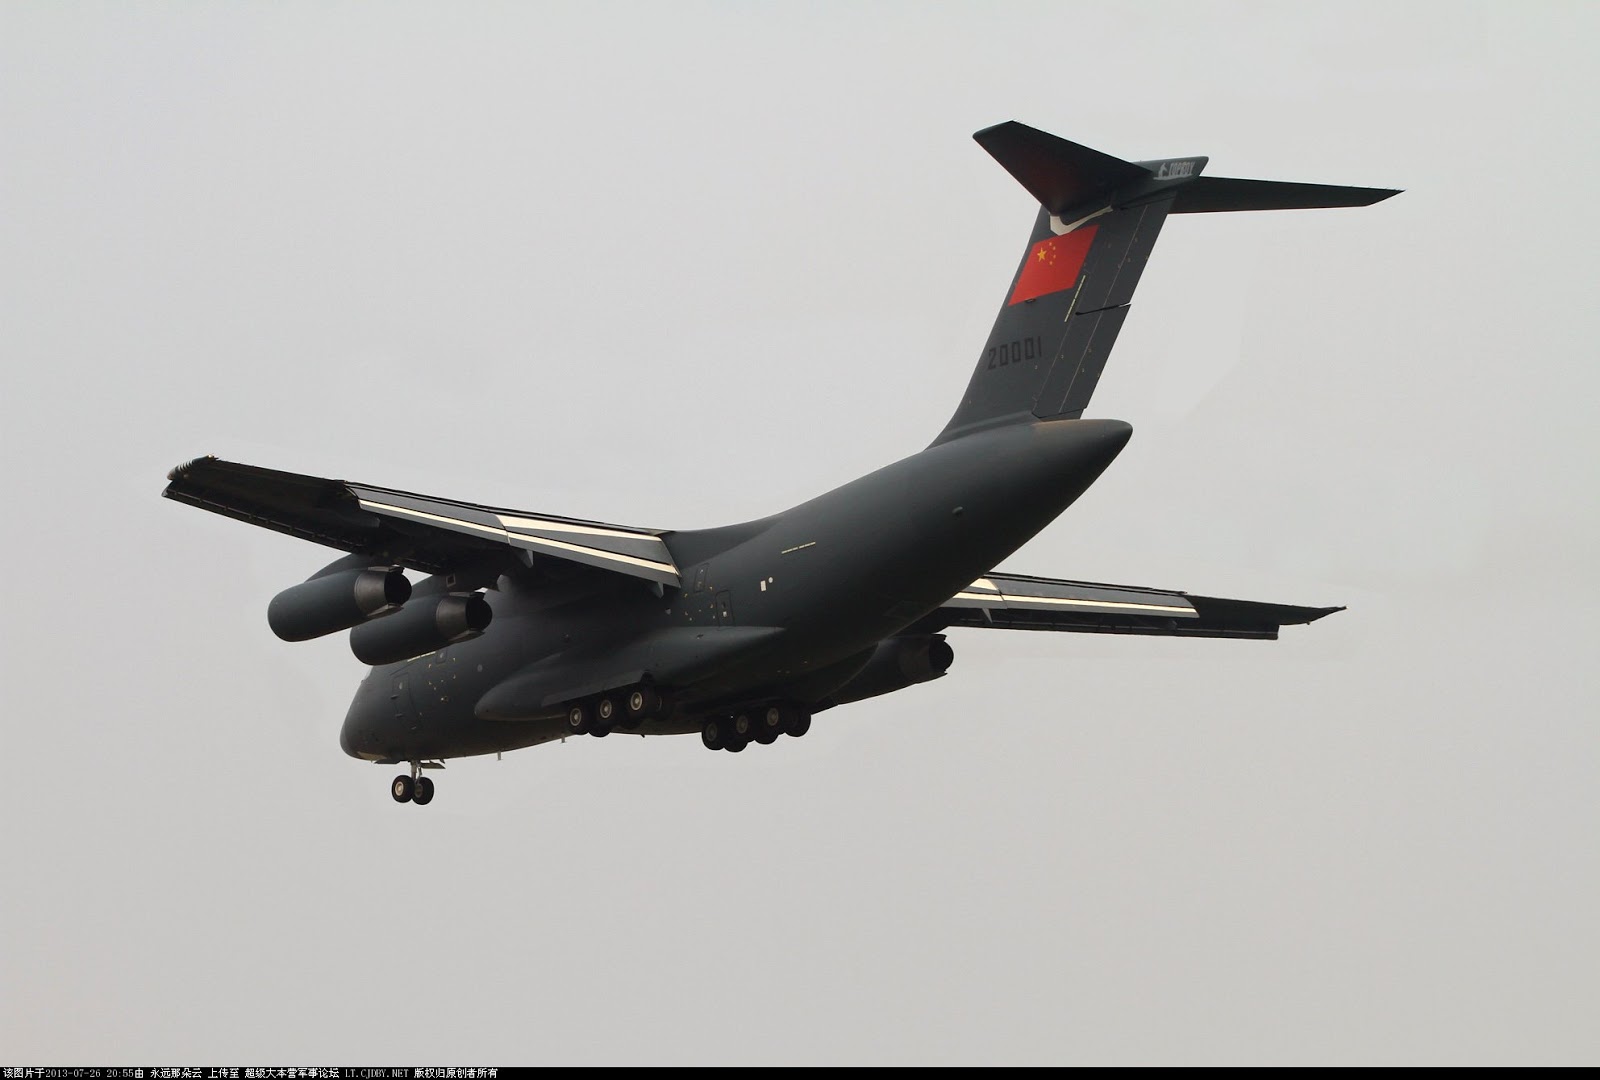  AVIC Y-20 Xian - Página 2 Y-20+China+Future+Military+Transport+Airplane+china+plaaf+air+force+refueling+aewc+aesa+import+flight+taxing+opertional+cgiexport+russia+pakistan+ws10+12+13+15+20+ps90+il-78+73+476+engine+turbofan++%25283%2529